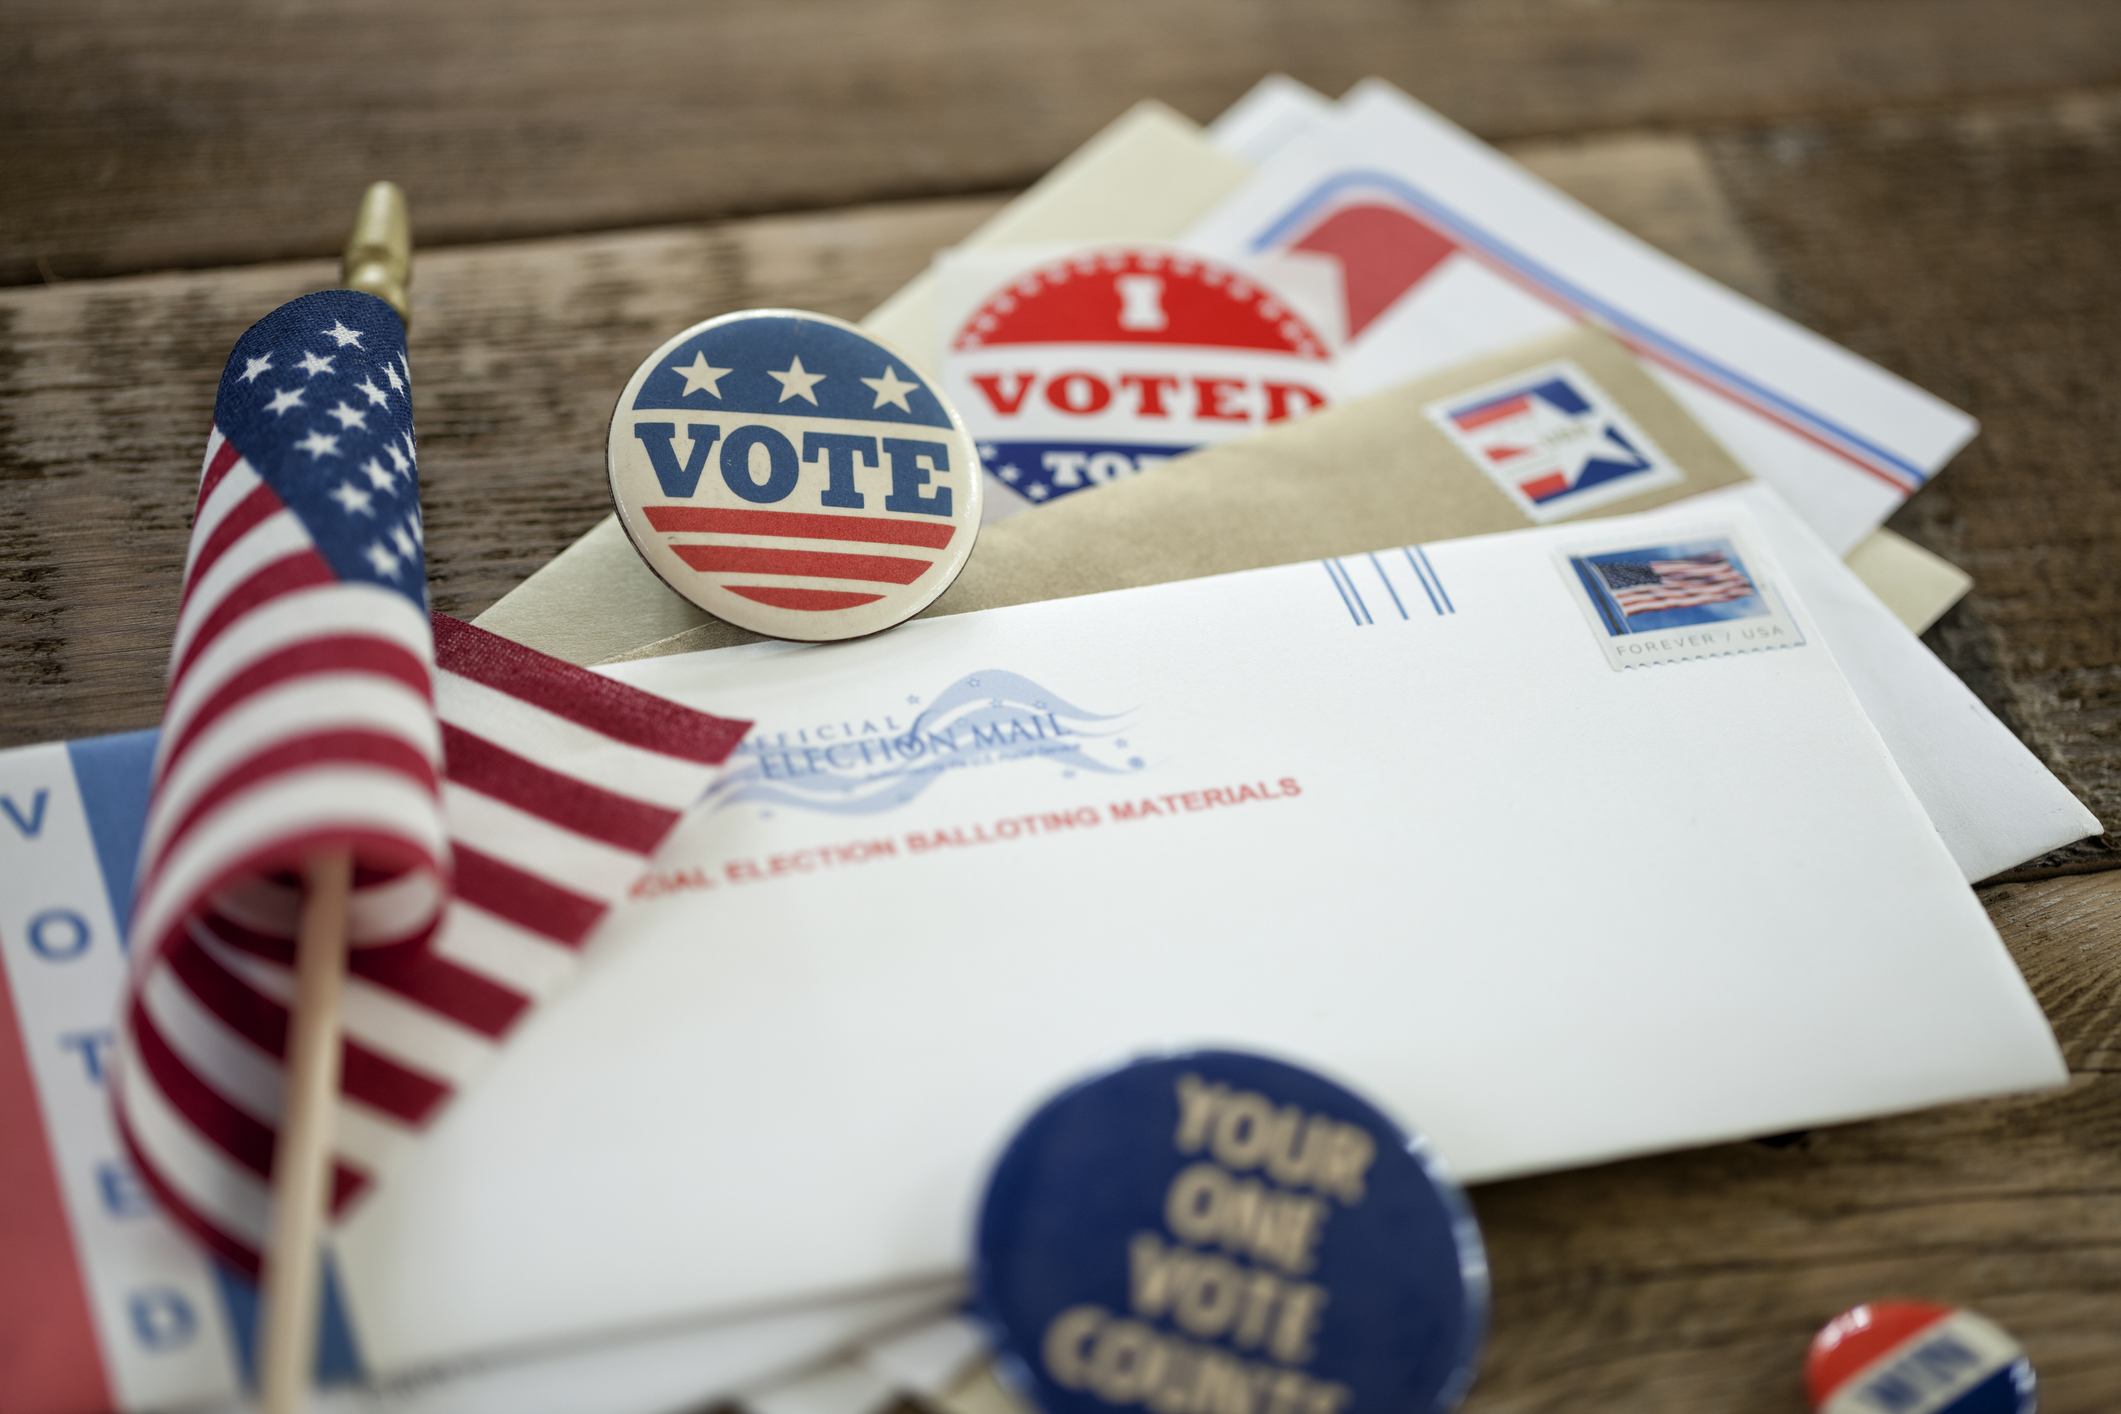 Filing week for the August primary in Clark County runs through Friday (iStock.com)